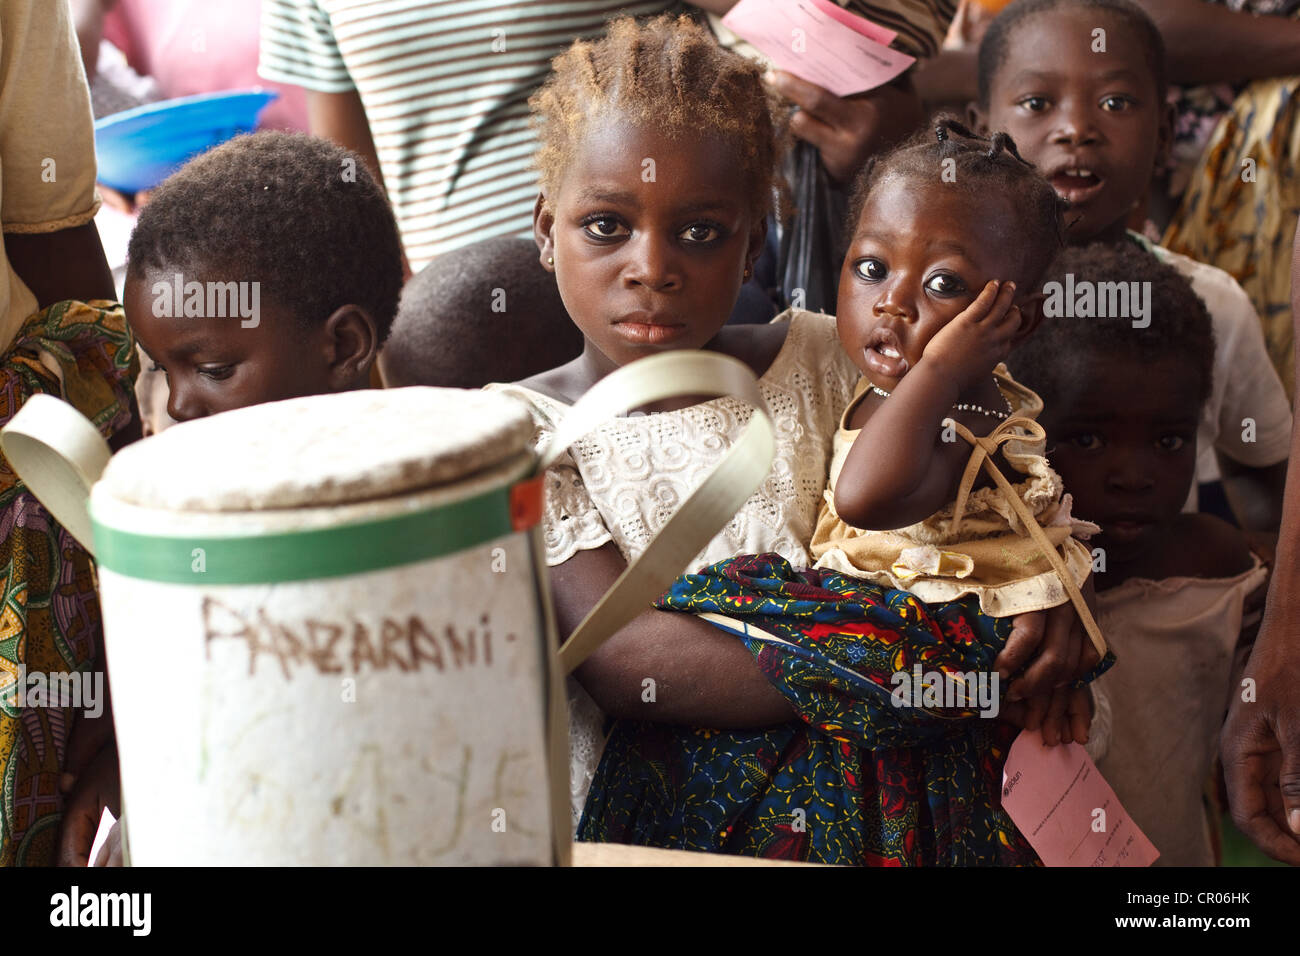 Children wait to get vaccinated during a national measles vaccination campaign at the Panzarani health center Stock Photo